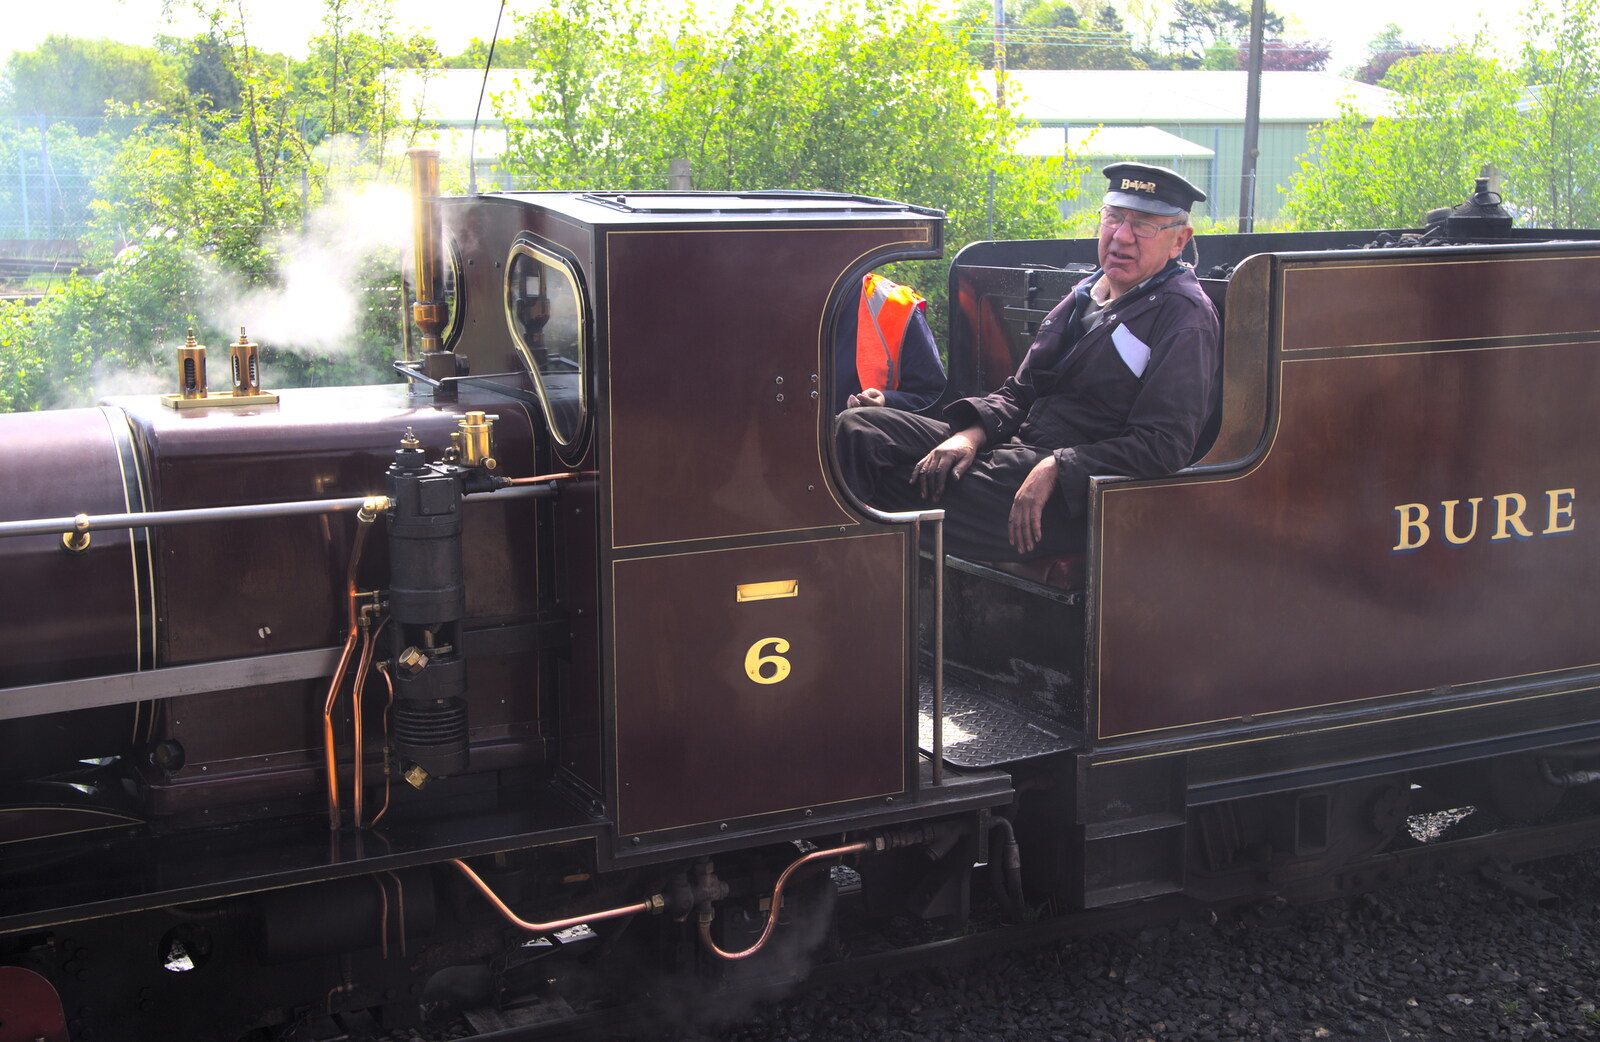 The engine driver on 'Blickling Hall' from The Bure Valley Railway, Aylsham, Norfolk - 26th May 2013